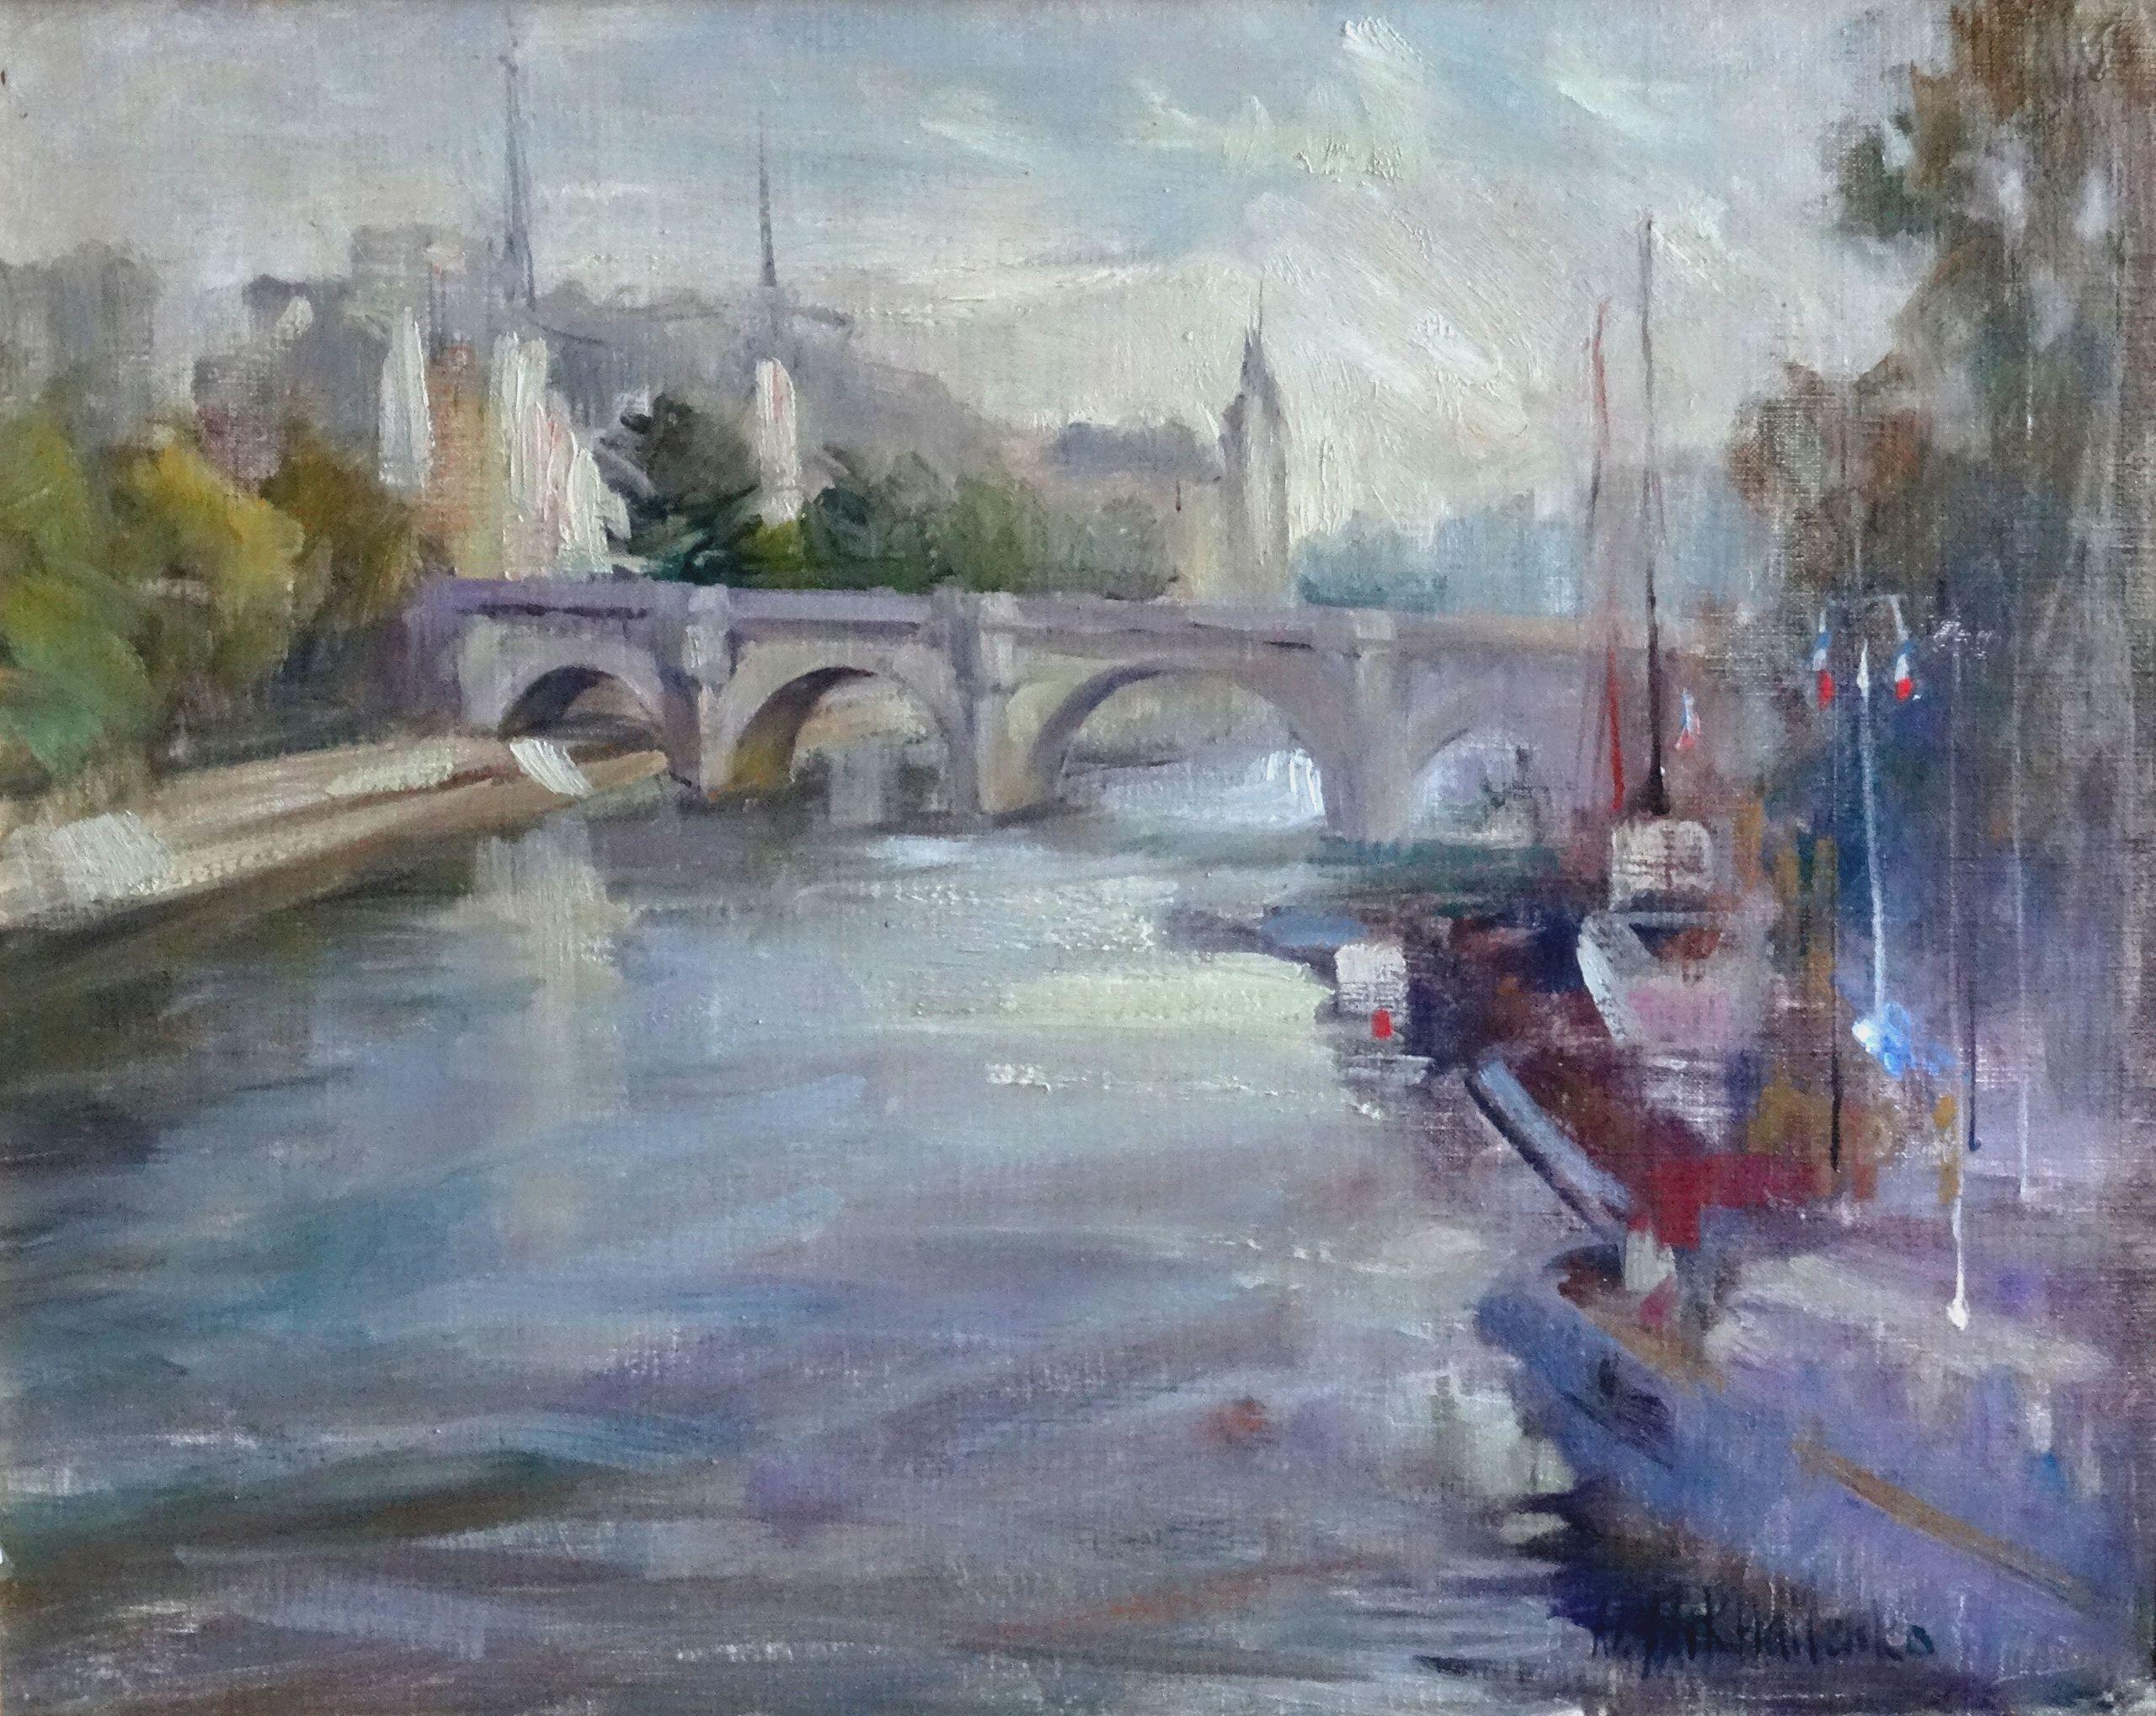 View from the bridge. Oil on canvas and cardboard, 41x51 cm